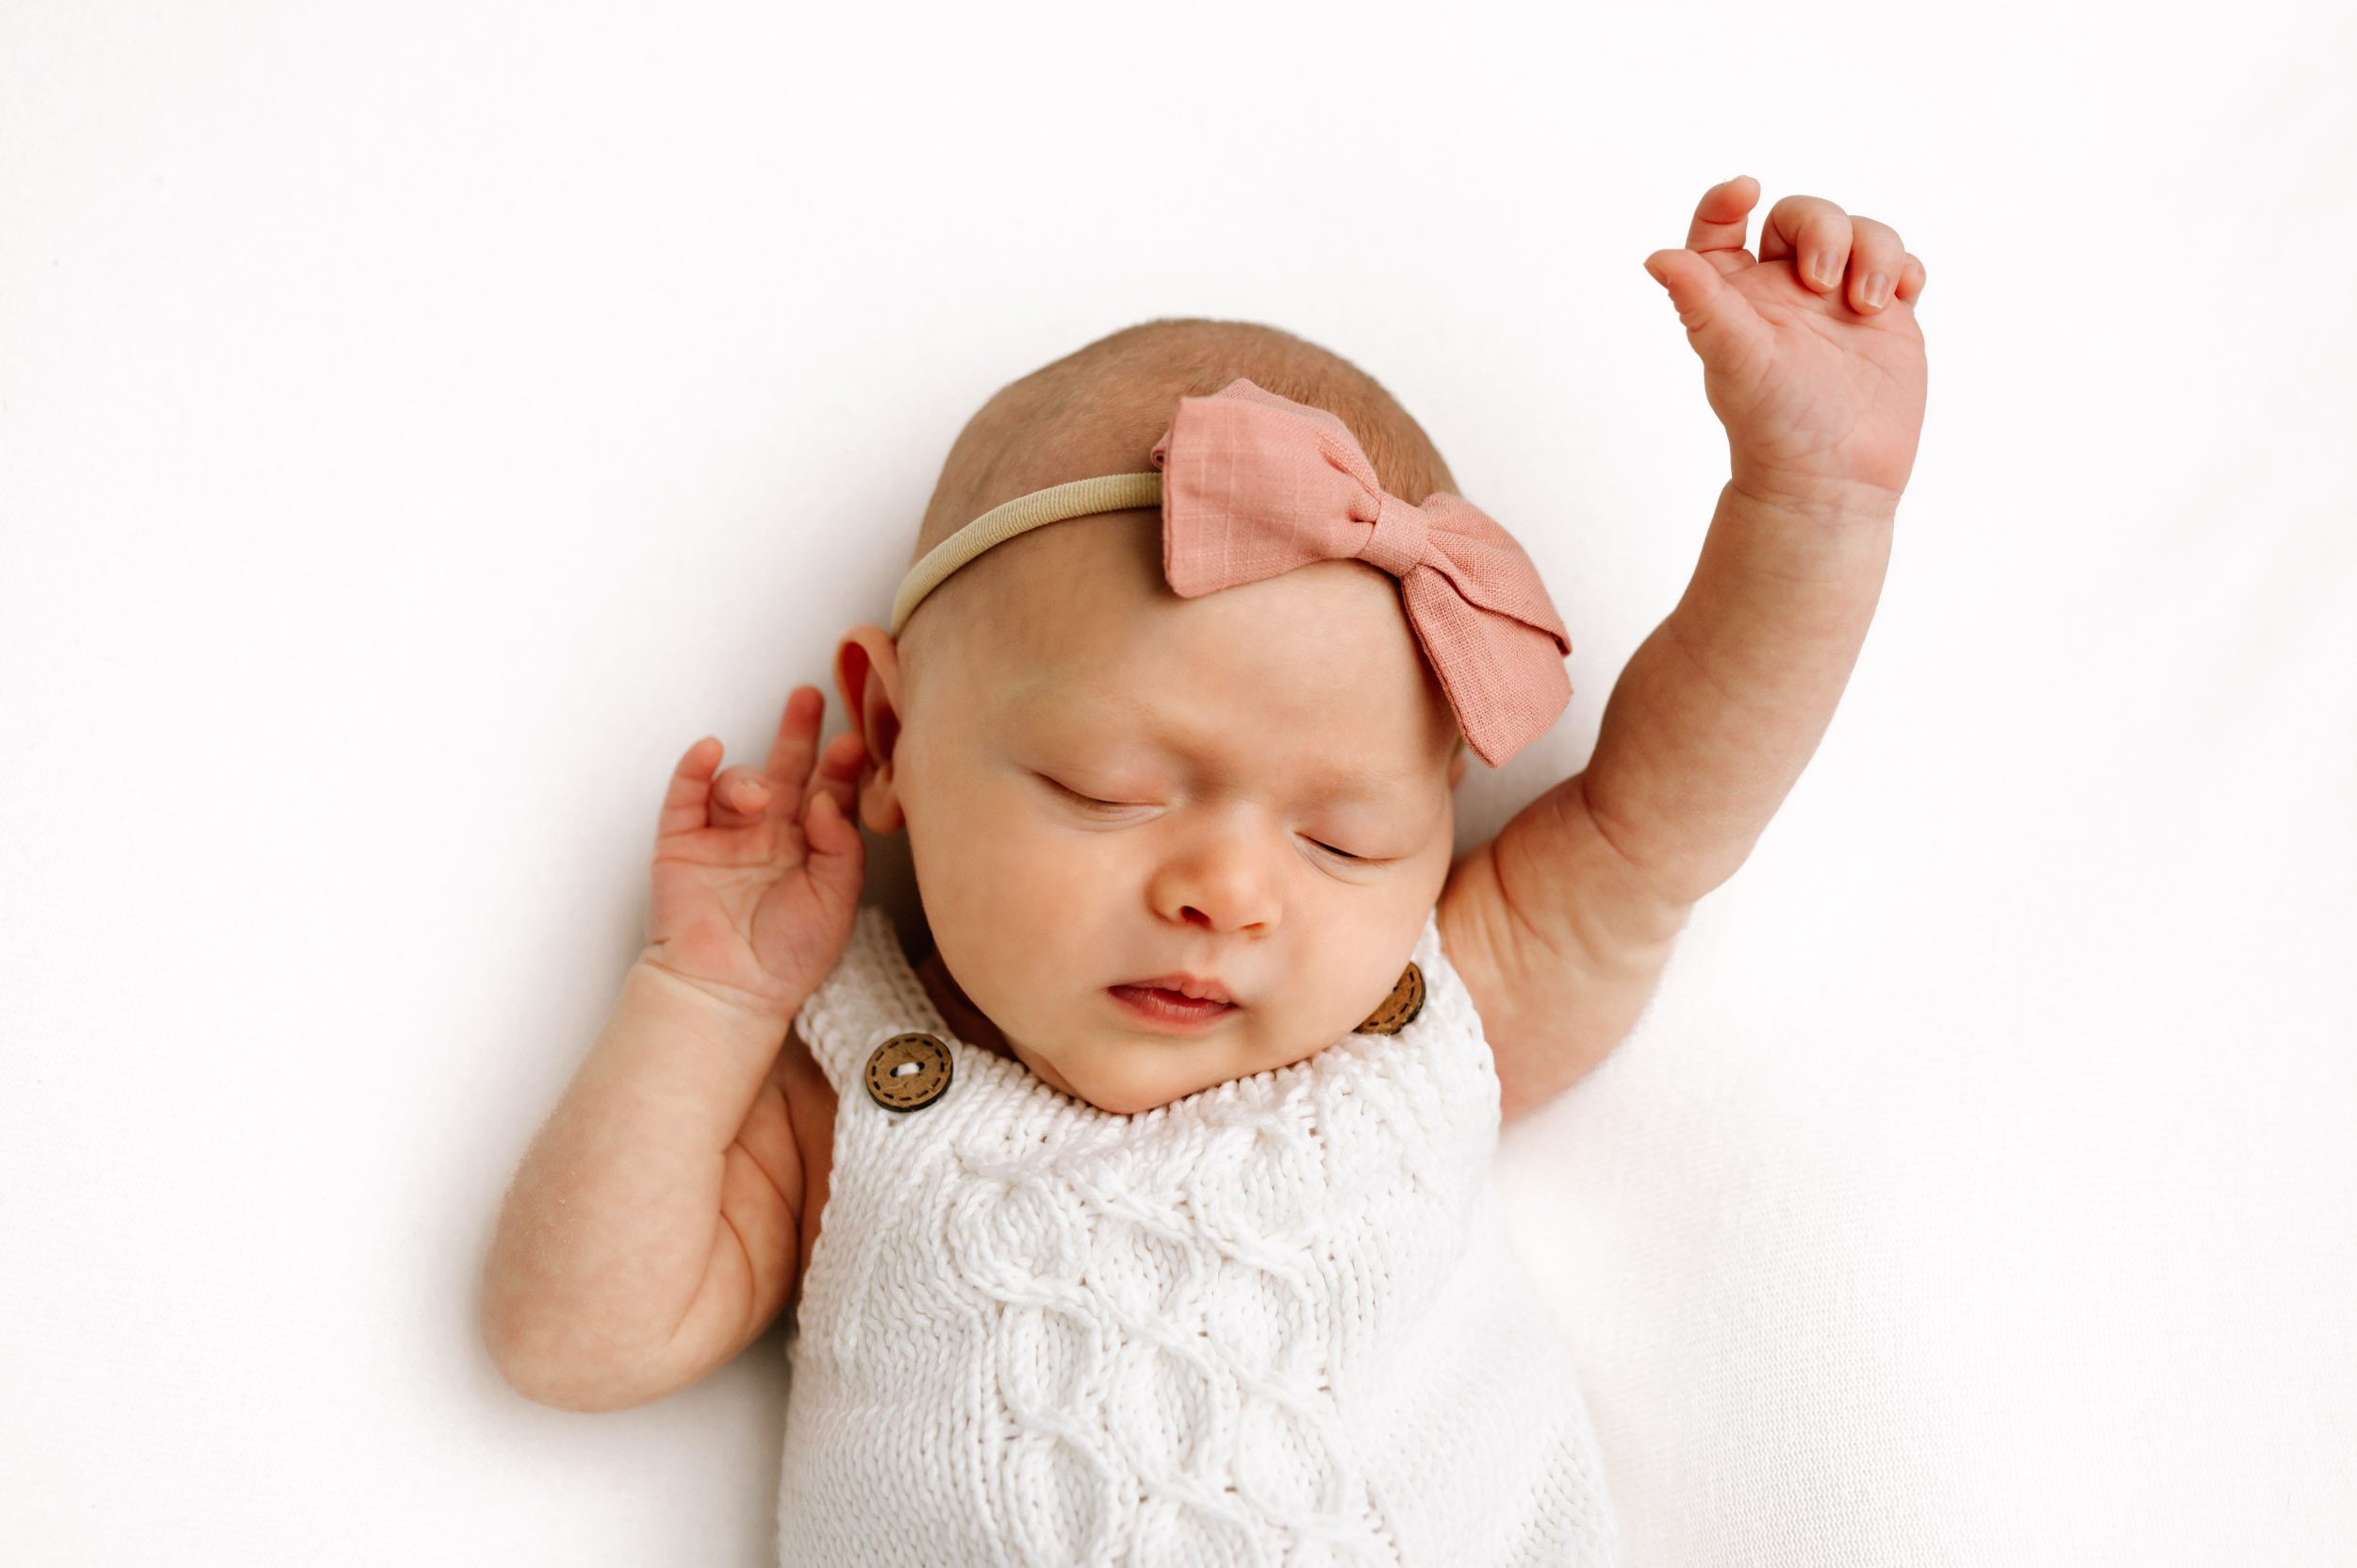 a baby girl wearing a white knit romper and a pink headband laying on a white backdrop and stretching her arms as she wakes up from a nap during a newborn photoshoot